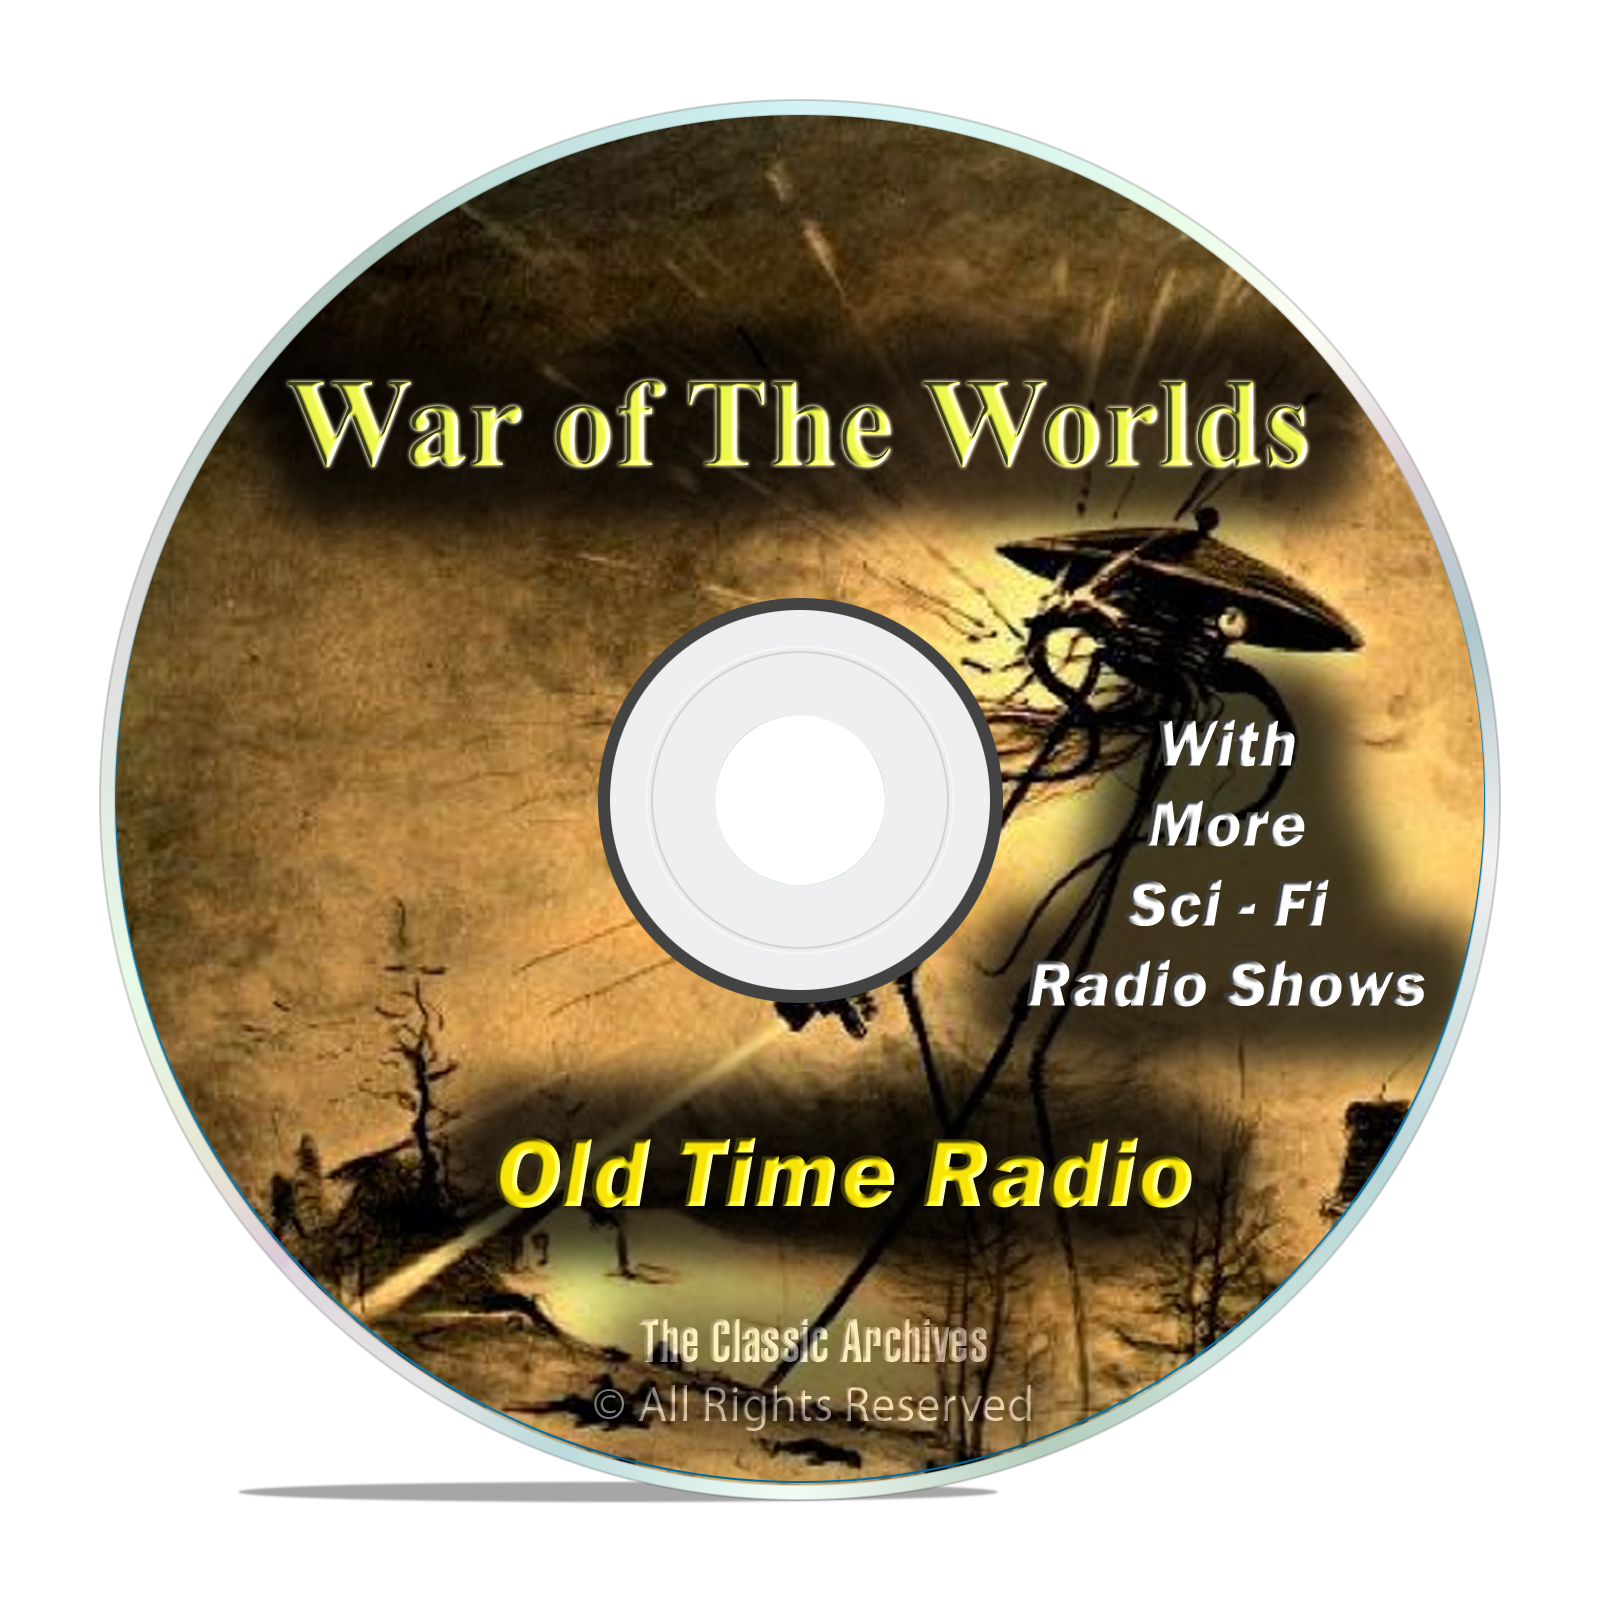 The War of the Worlds, HG Wells, with 960 Old Time Radio SCI FI Episodes